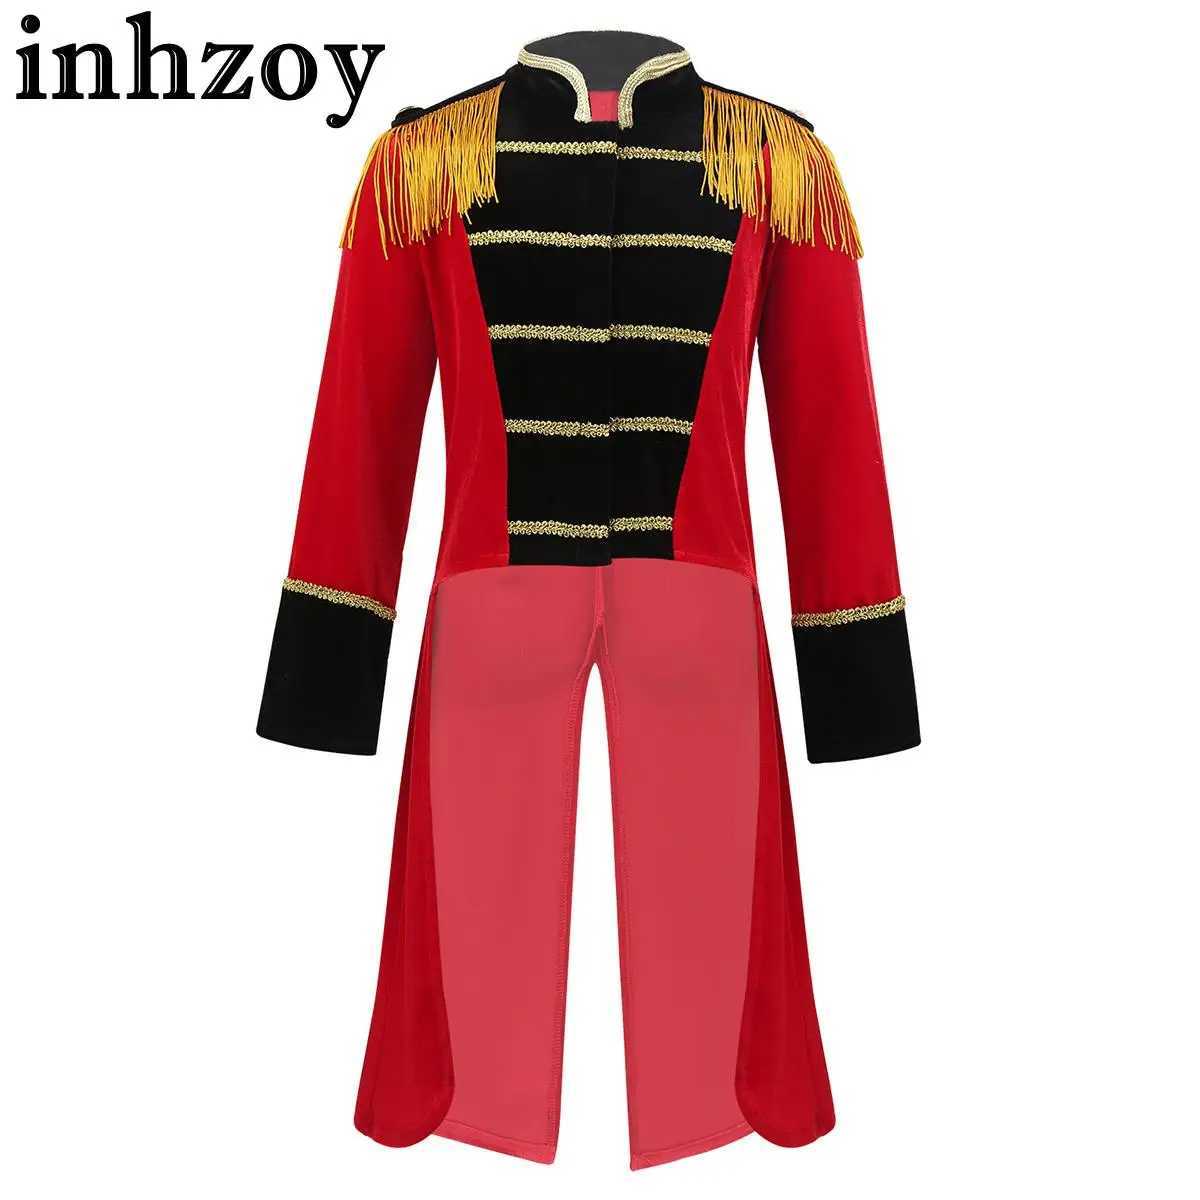 Cosplay Kids Boys Circus Ringmaster Kostuum Halloween Cosplay Party -outfit Fransen Gold Taapings Tailcoat Jacket Tops voor Performal2405